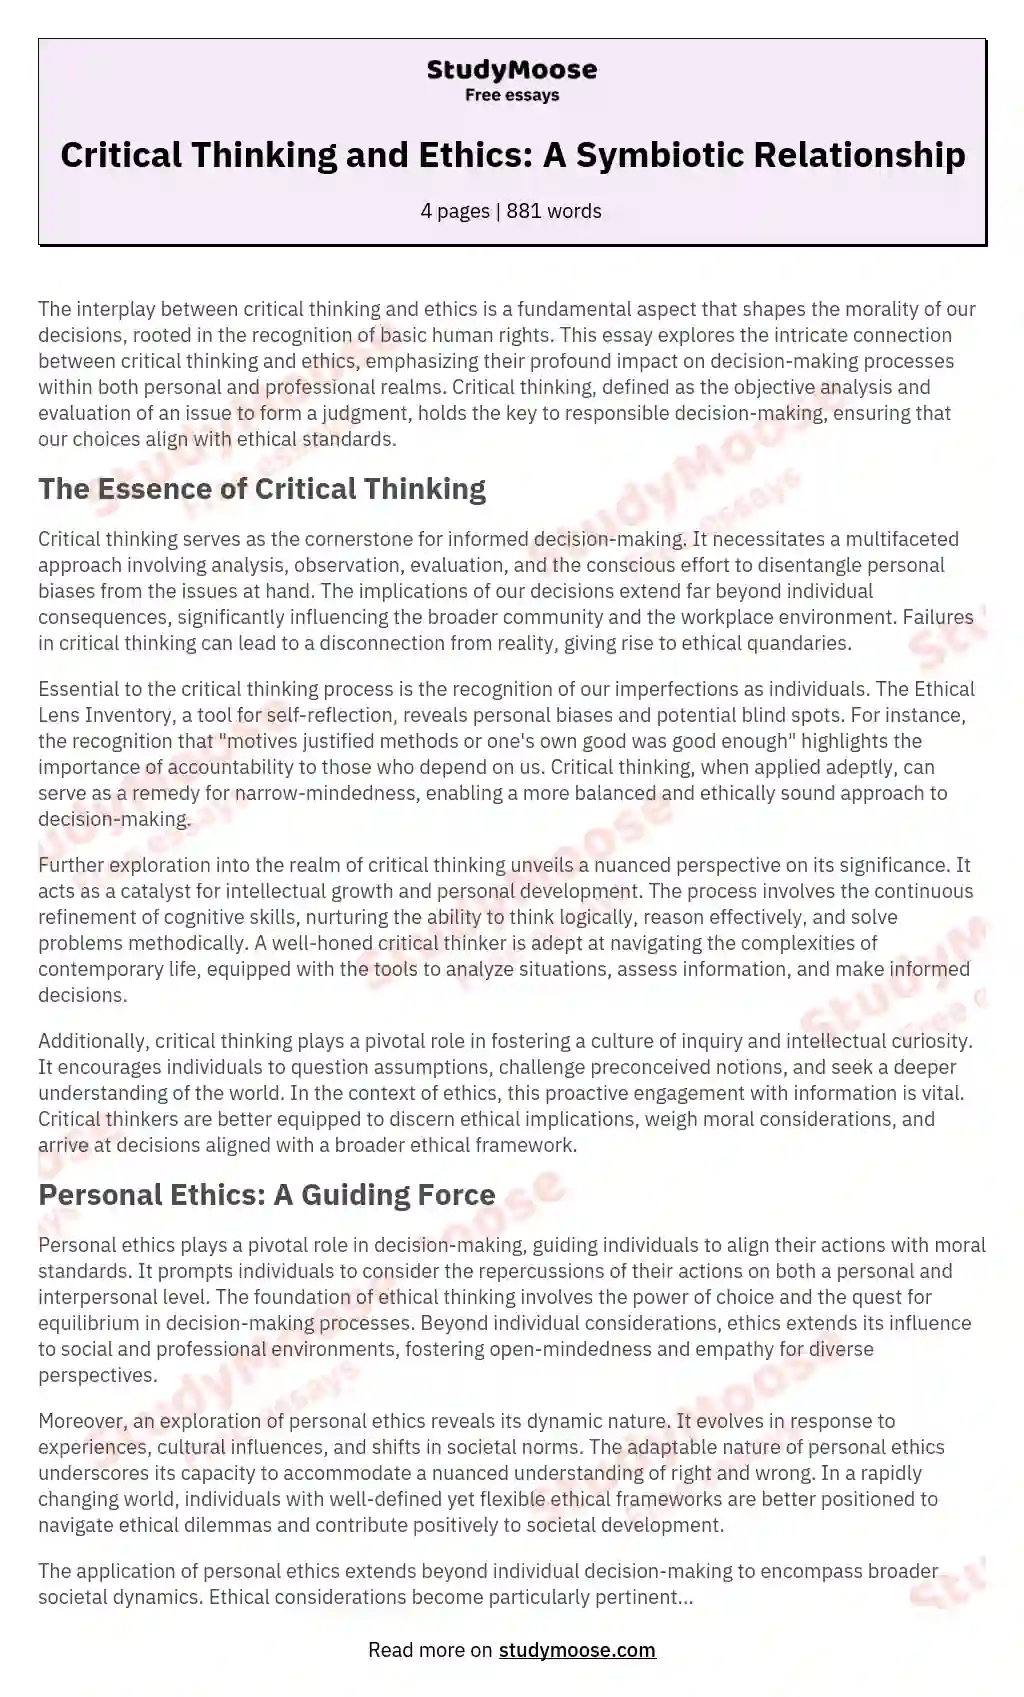 Critical Thinking and Ethics: A Symbiotic Relationship essay